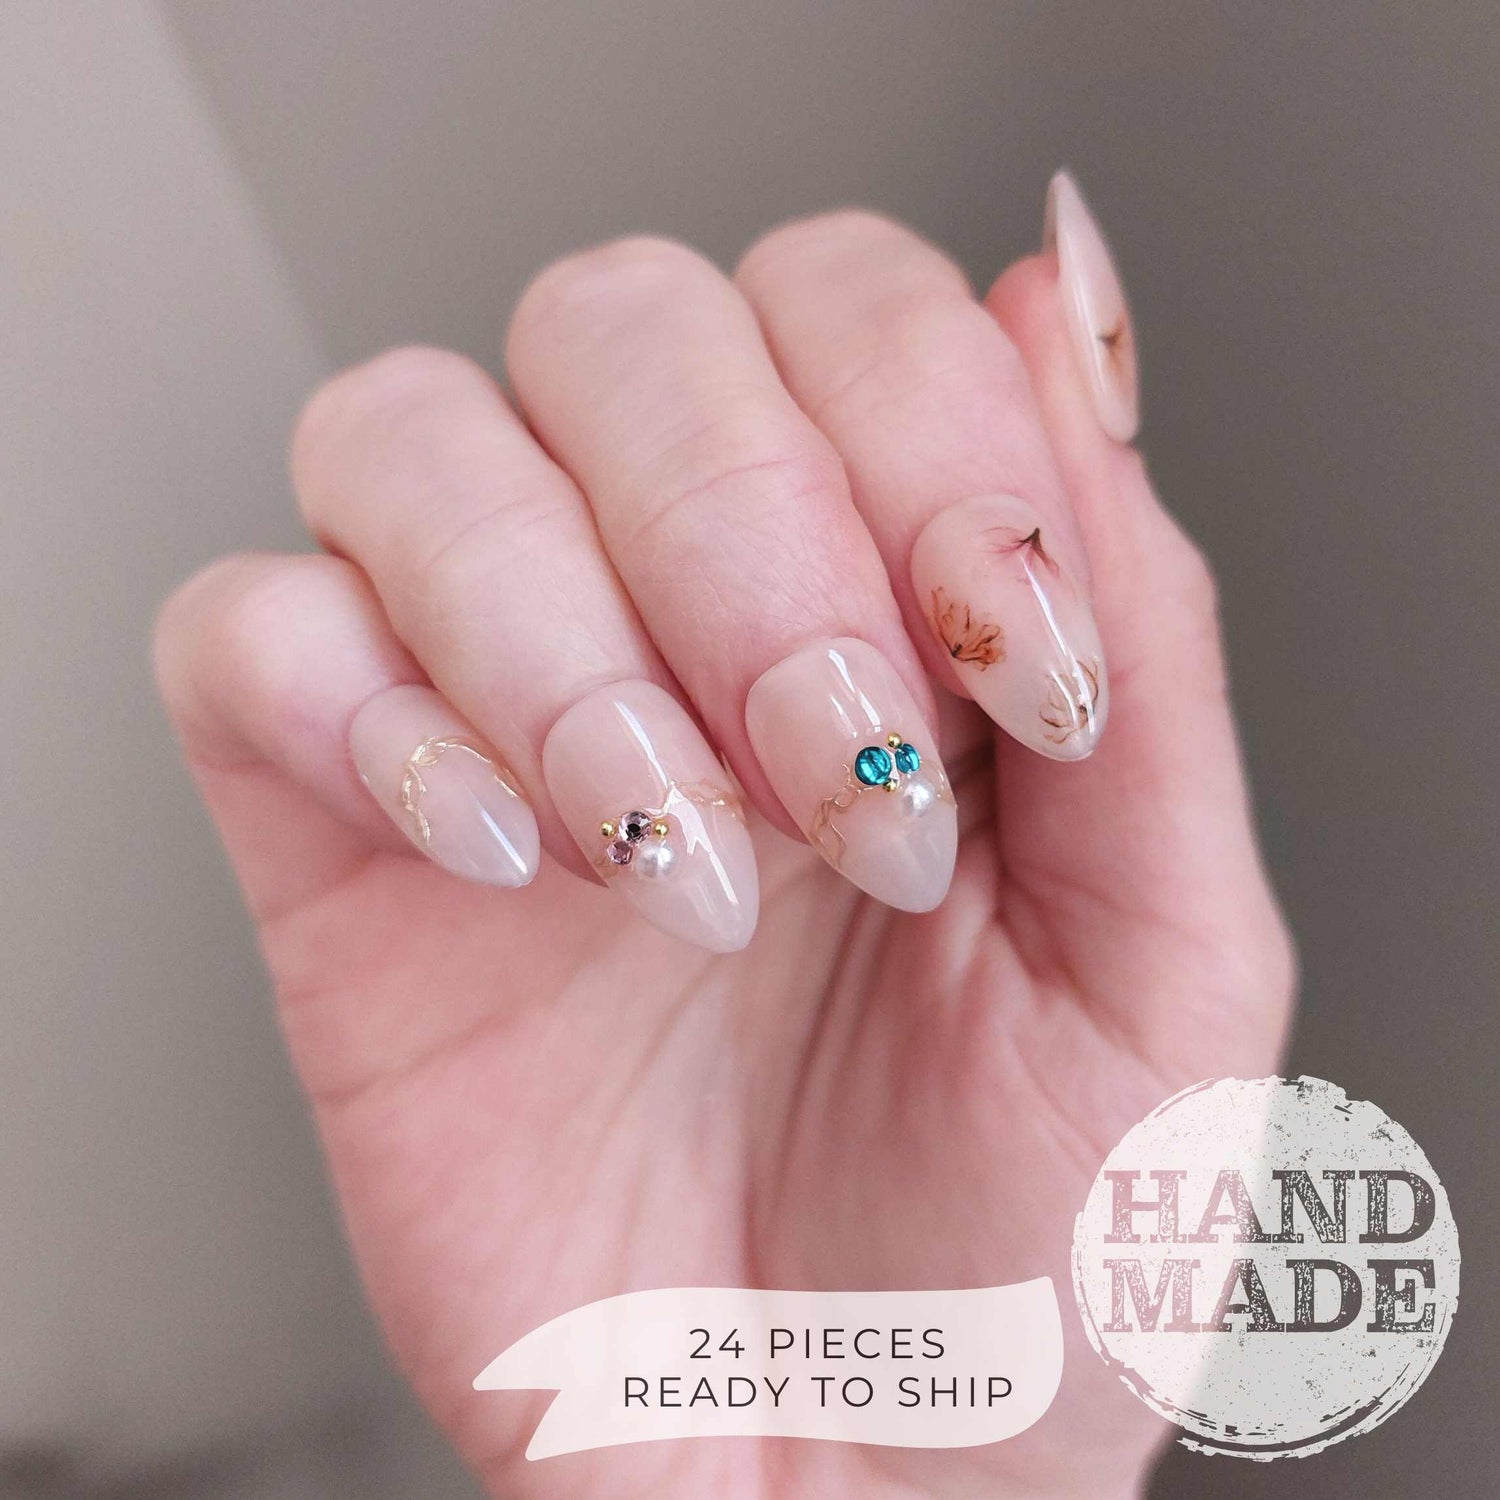 Floral press on nails, flower nails with dainty flowers, colorful gems, watercolor florals, and gold accents. FancyB handmade nails in short almond.